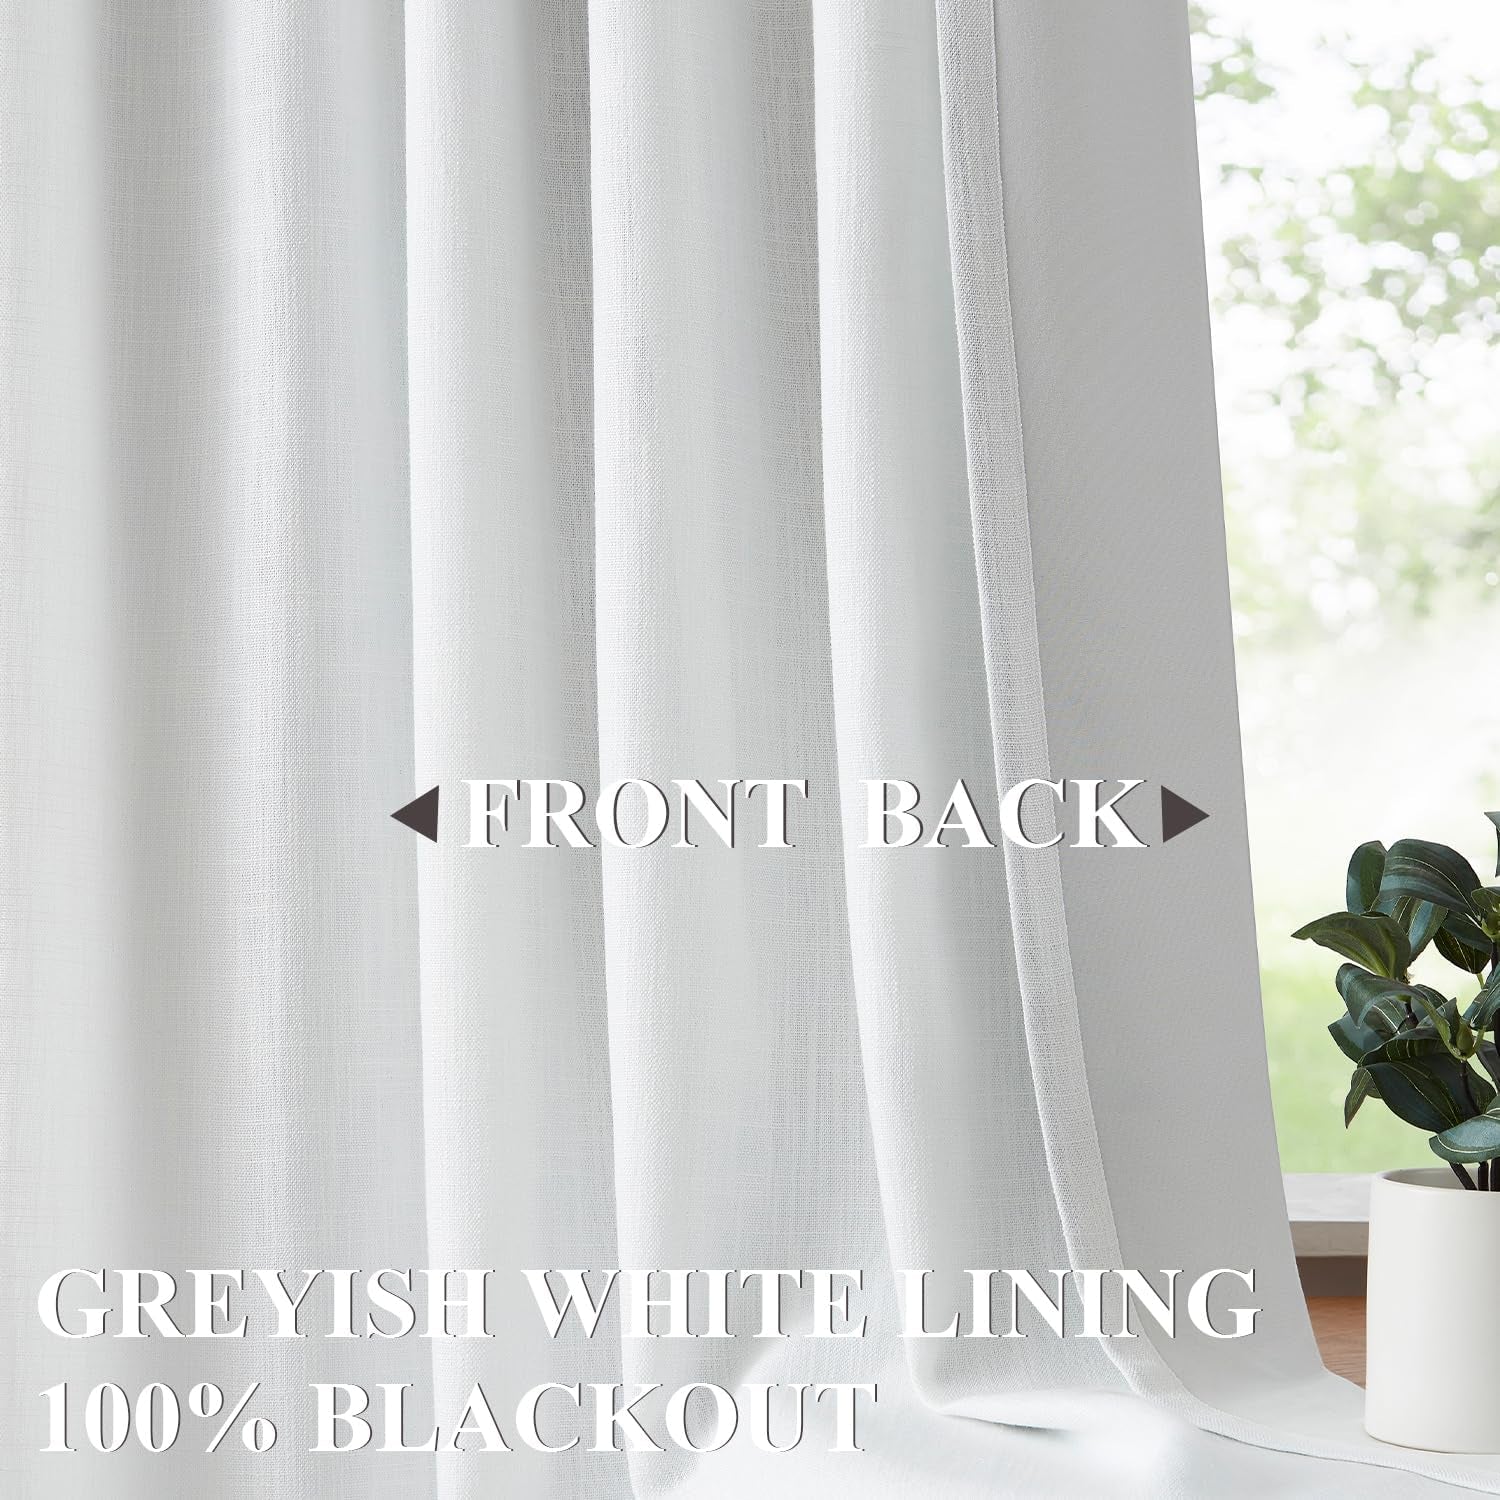 Vision Home White Pinch Pleated Full Blackout Curtains Thermal Insulated Window Curtains 84 Inch for Living Room Bedroom Room Darkening Pinch Pleat Drapes with Hooks Back Tab 2 Panel 40" Wx84 L  Vision Home   